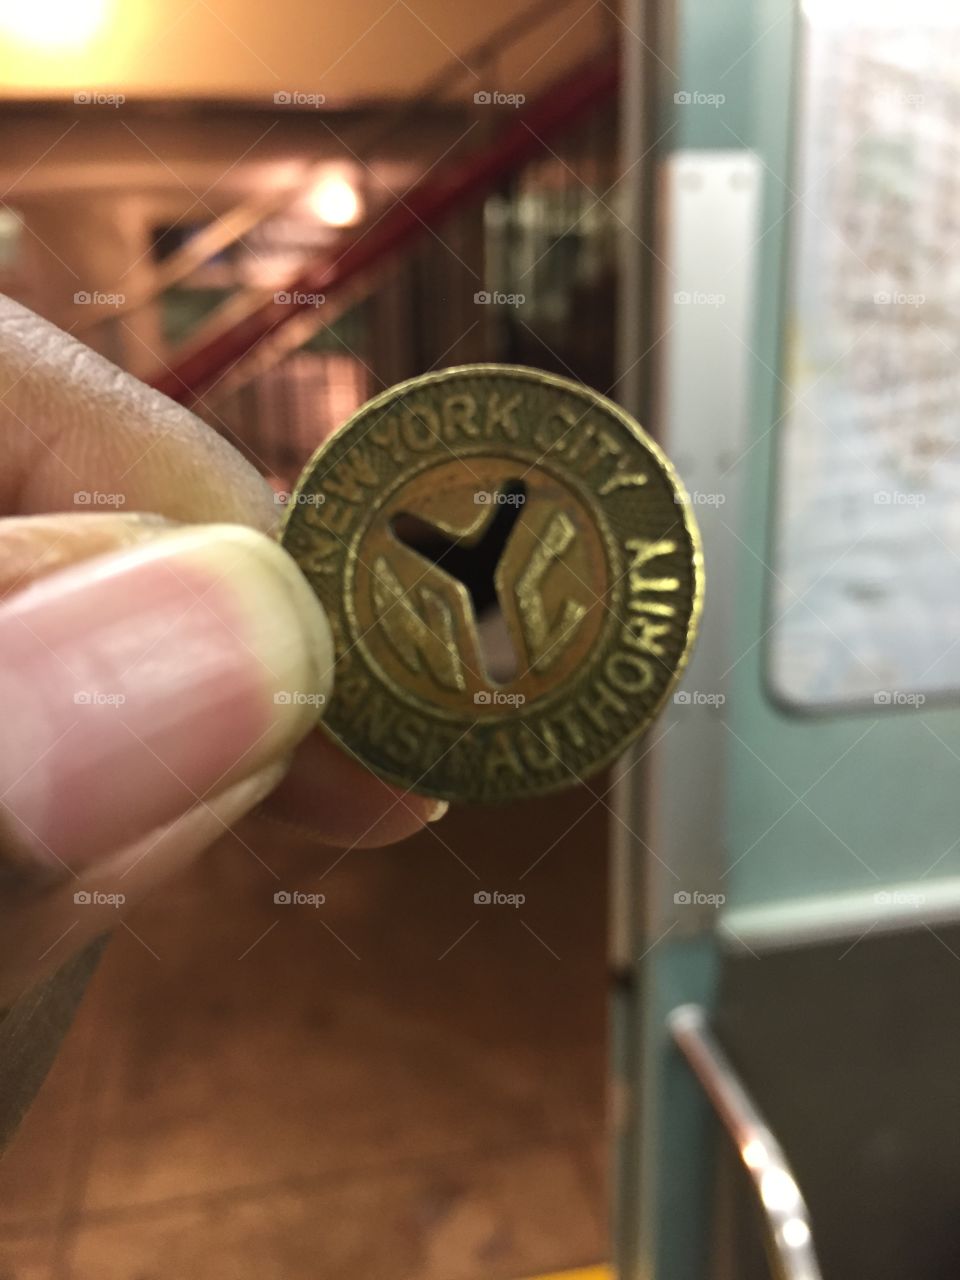 For all my New Yorkers out there, this was your ticket for our transit system before the MetroCard! Just one coin and the city was yours for the taking. So many things have changed but let’s not forget where we started